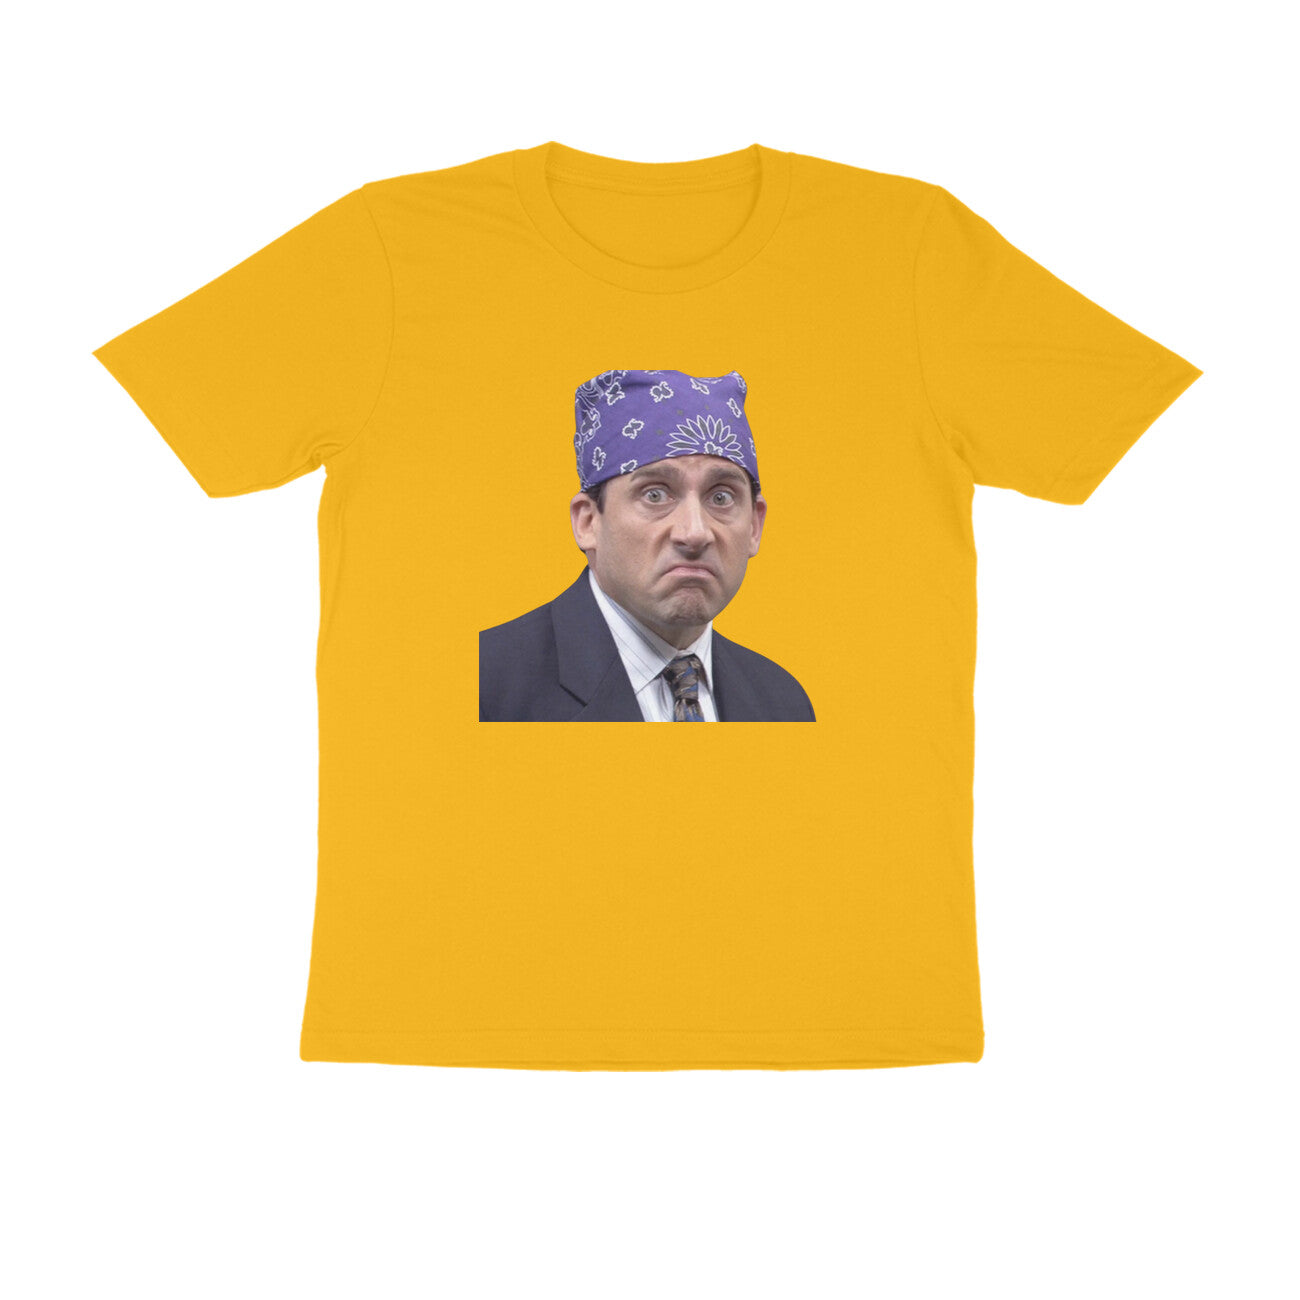 Prison Mike "The Office" Men's Round Neck T-Shirt